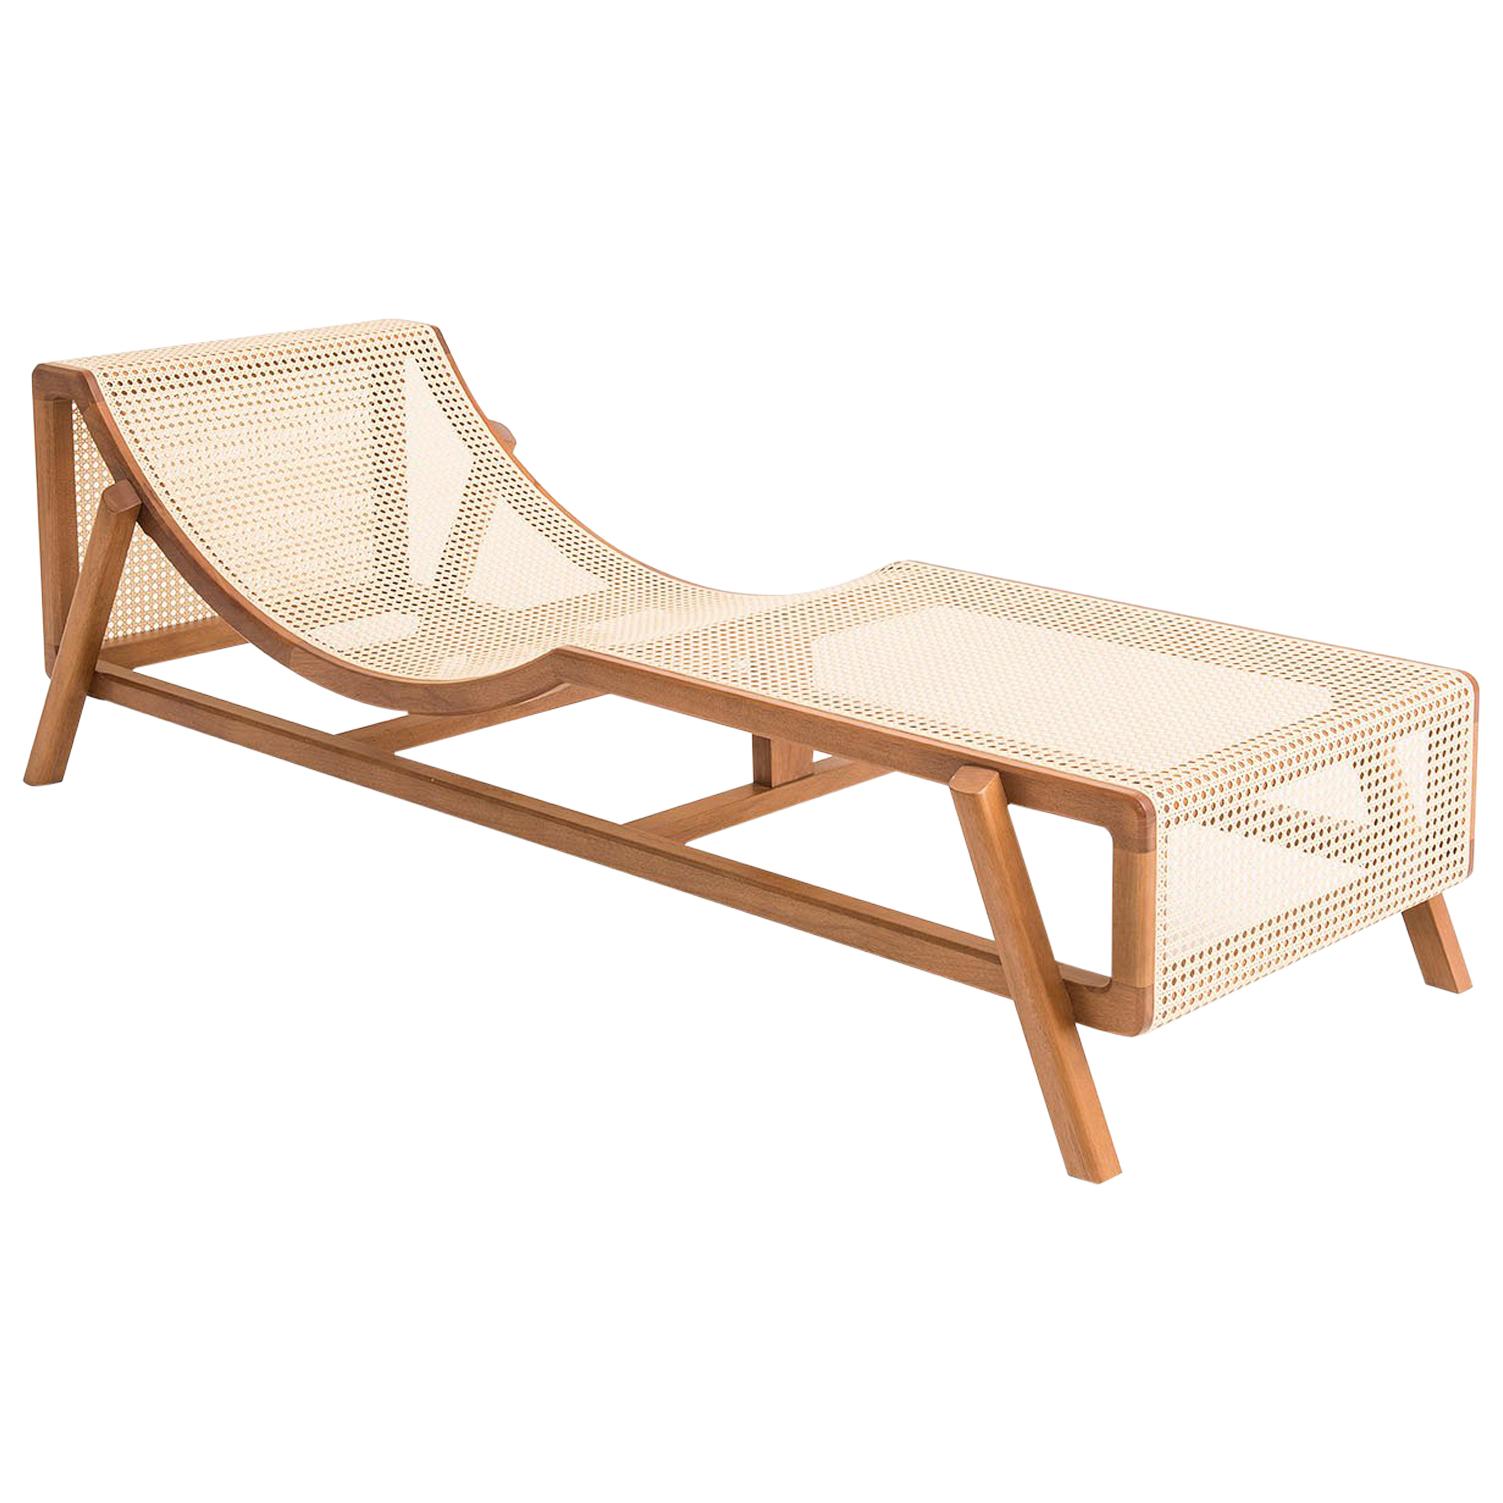 Chaise Longue, Jequibá Brazilian Wood and Natural Straw For Sale